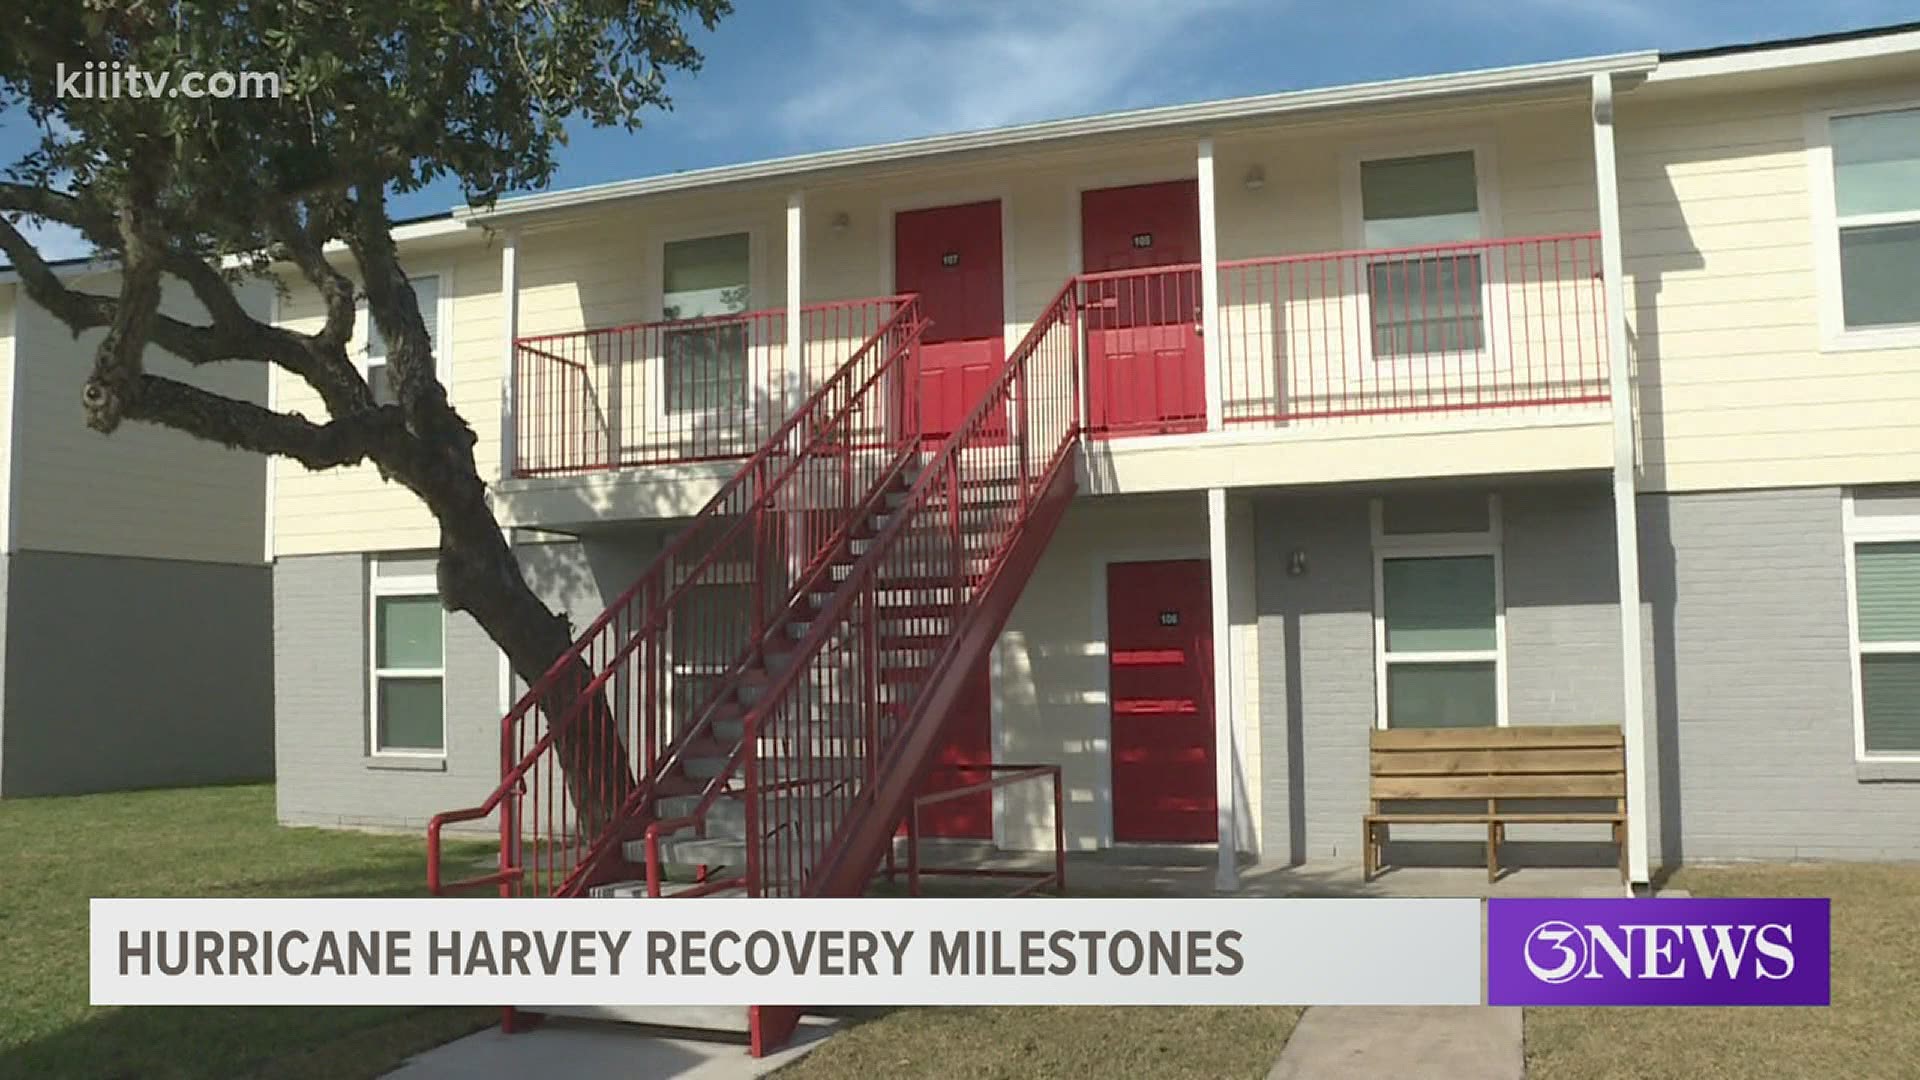 Texas General Land Office rebuilds homes in the Coastal Bend 